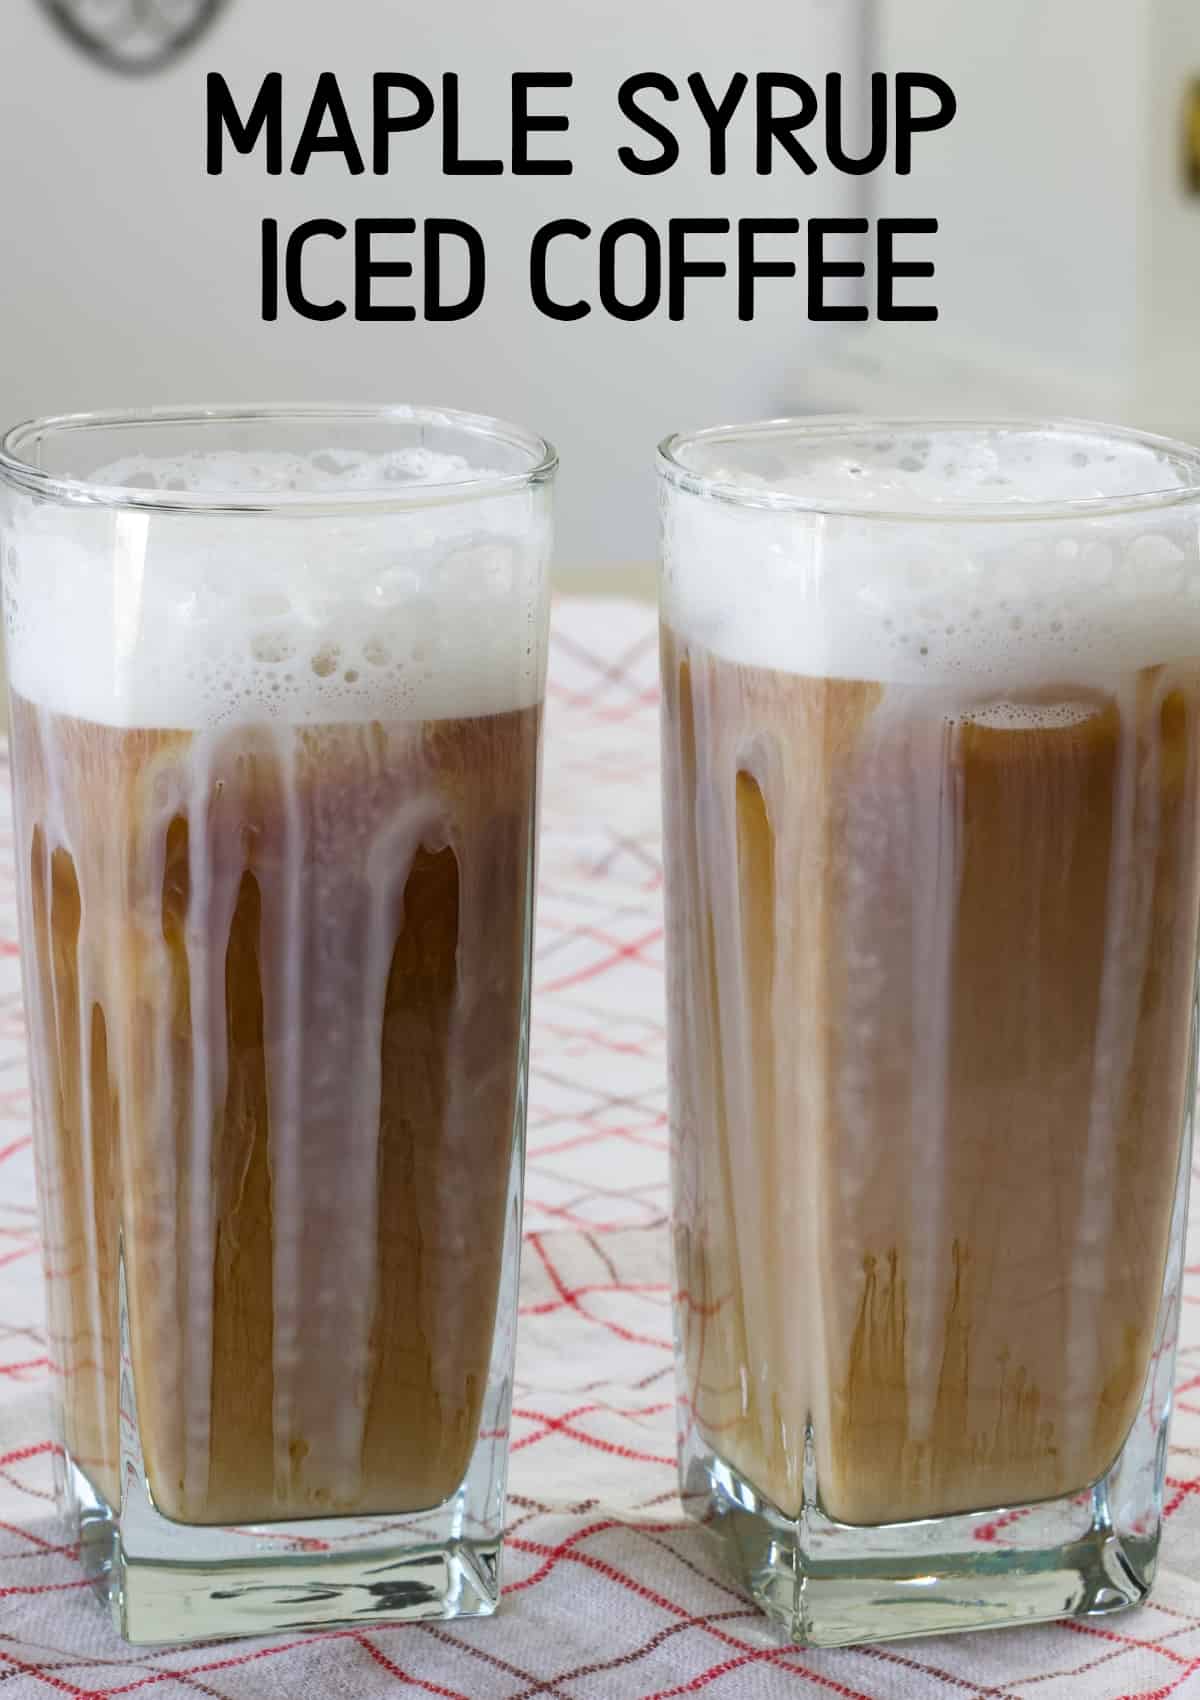 Two glasses of maple syrup iced coffee and the recipe title on the top of the image so it can be pinned on Pinterest.